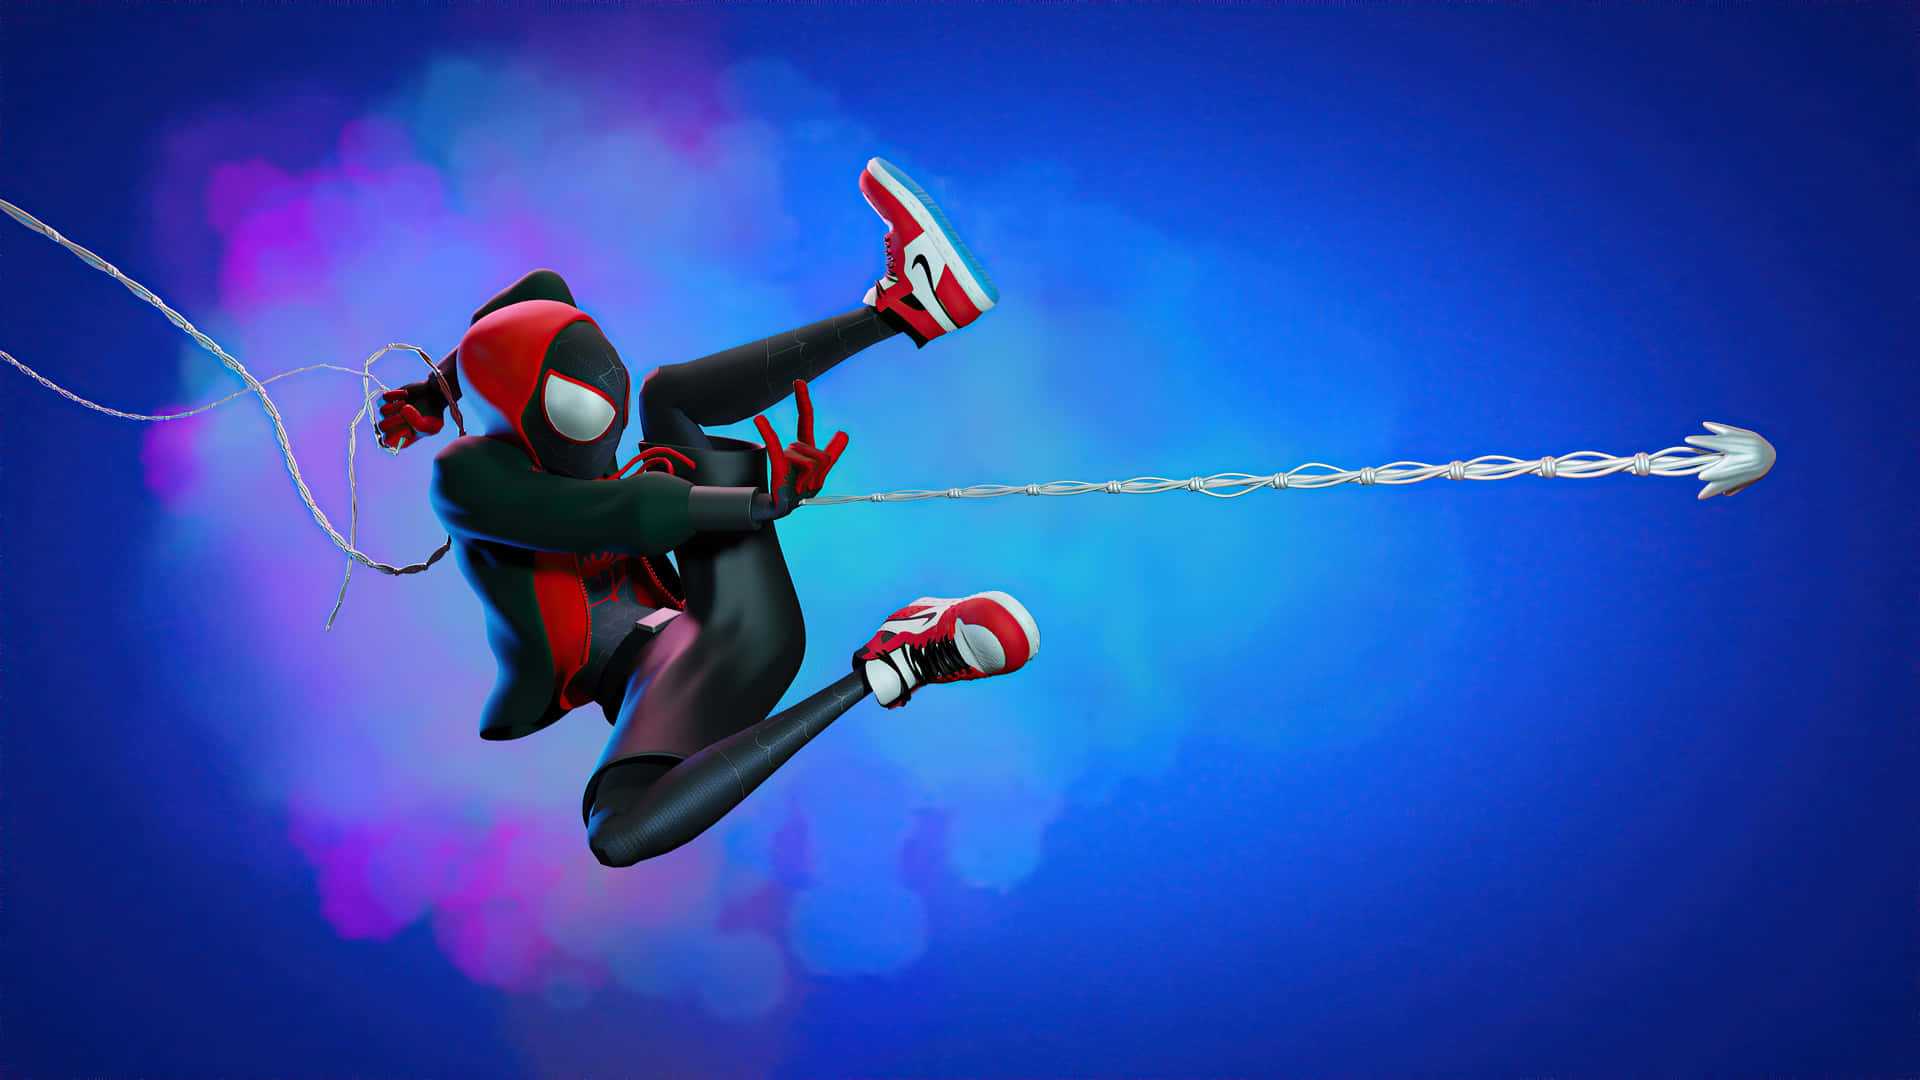 An impressive action shot of Spider-Man using his web shooter to swing through the city Wallpaper